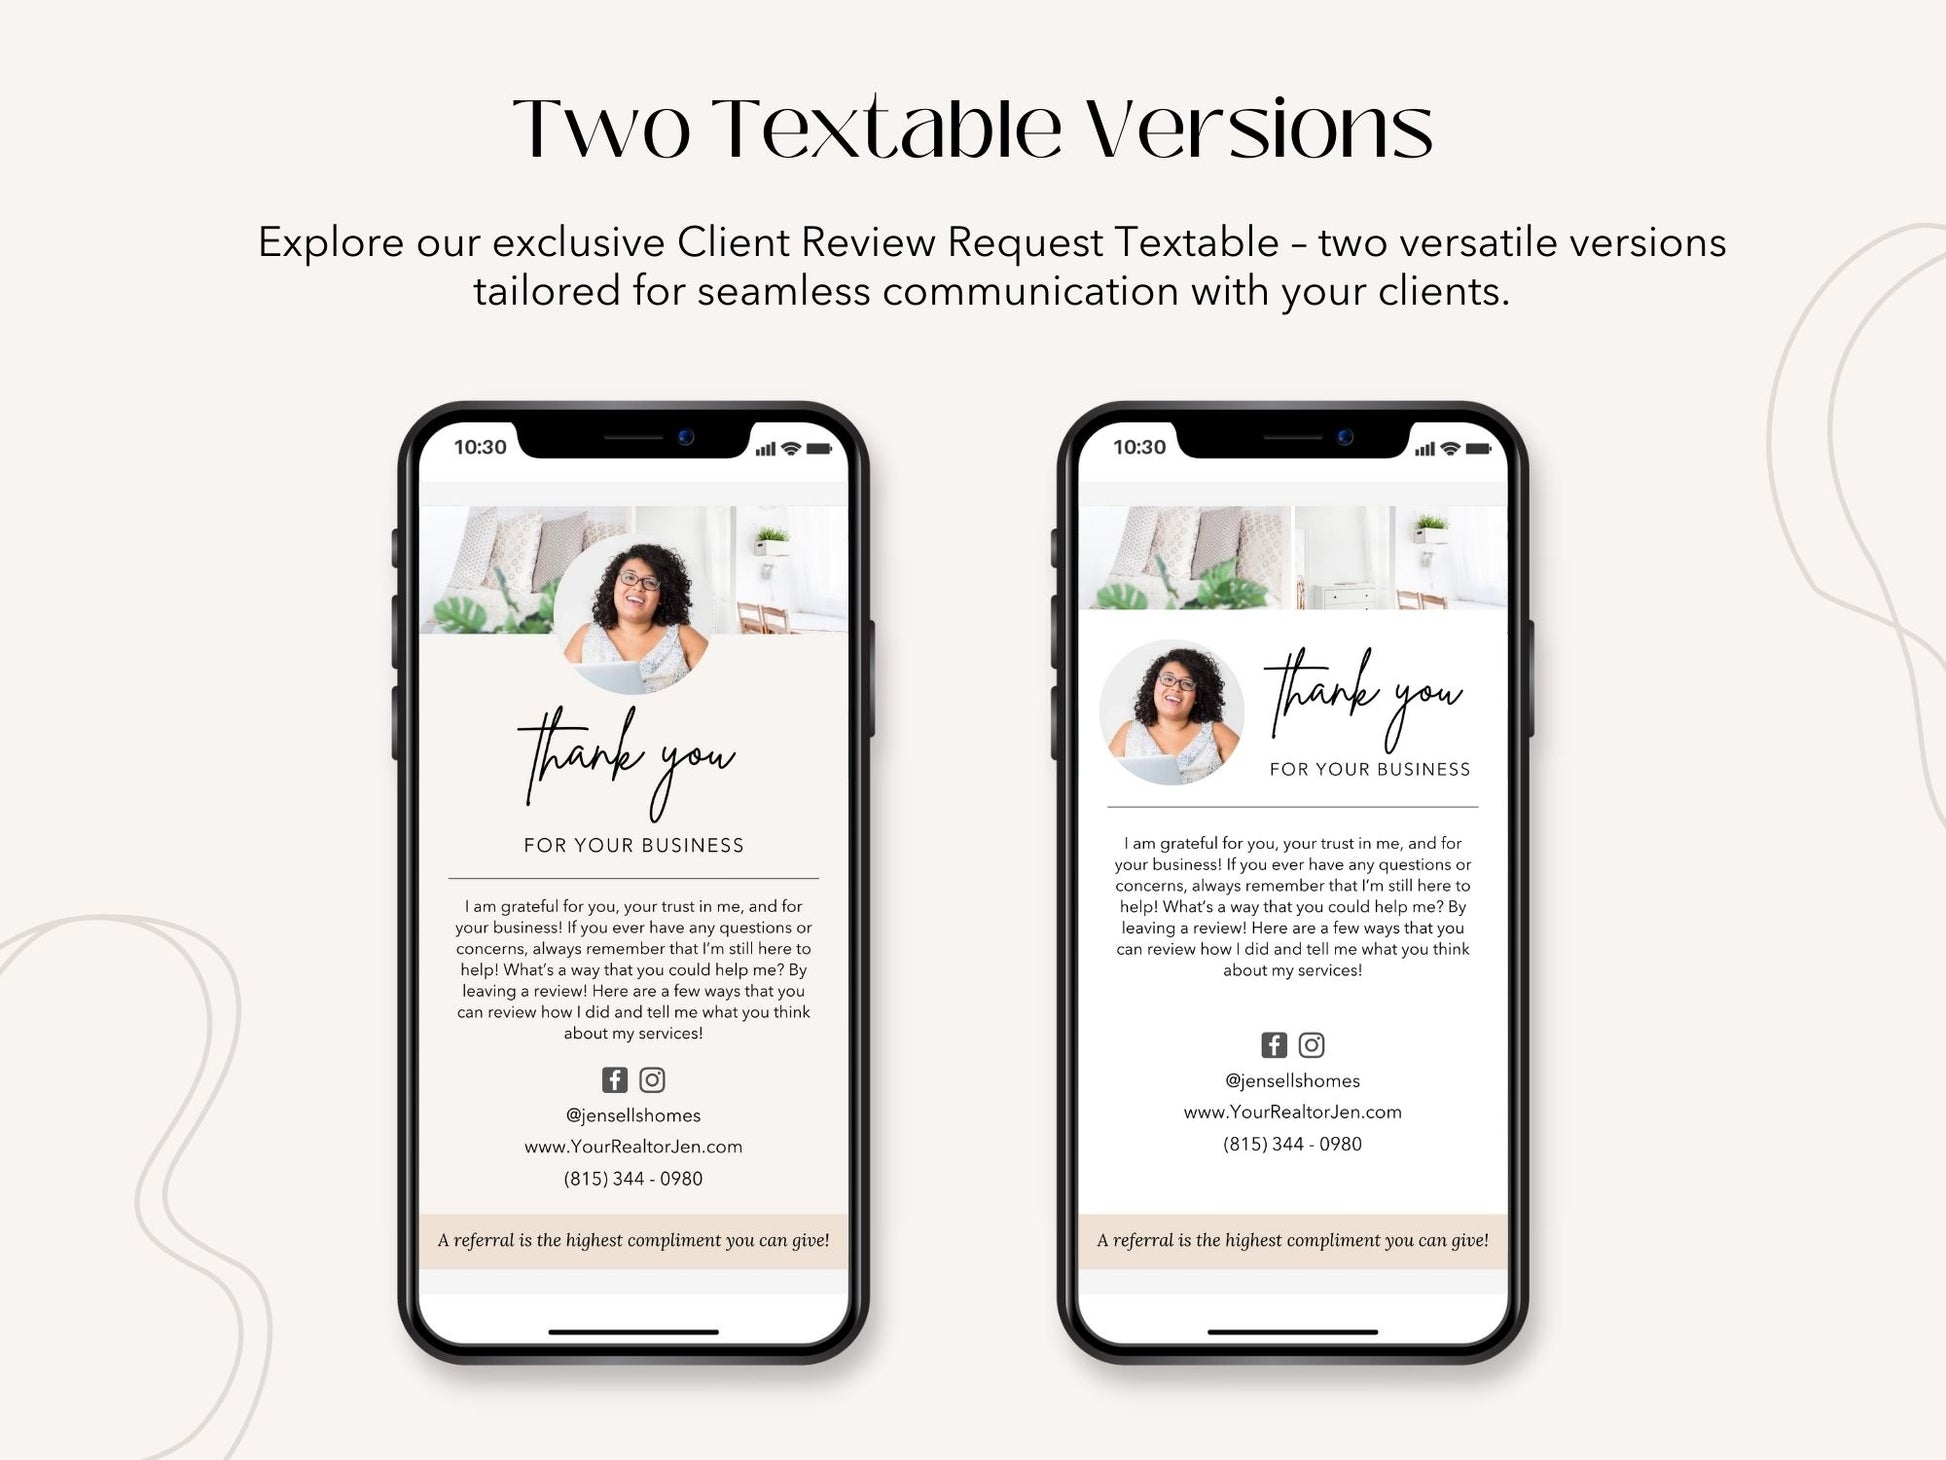 Review Request Textable and Flyer Bundle - Elevate your client engagement and gather valuable feedback effortlessly with a compelling review request flyer and a convenient textable client review request.